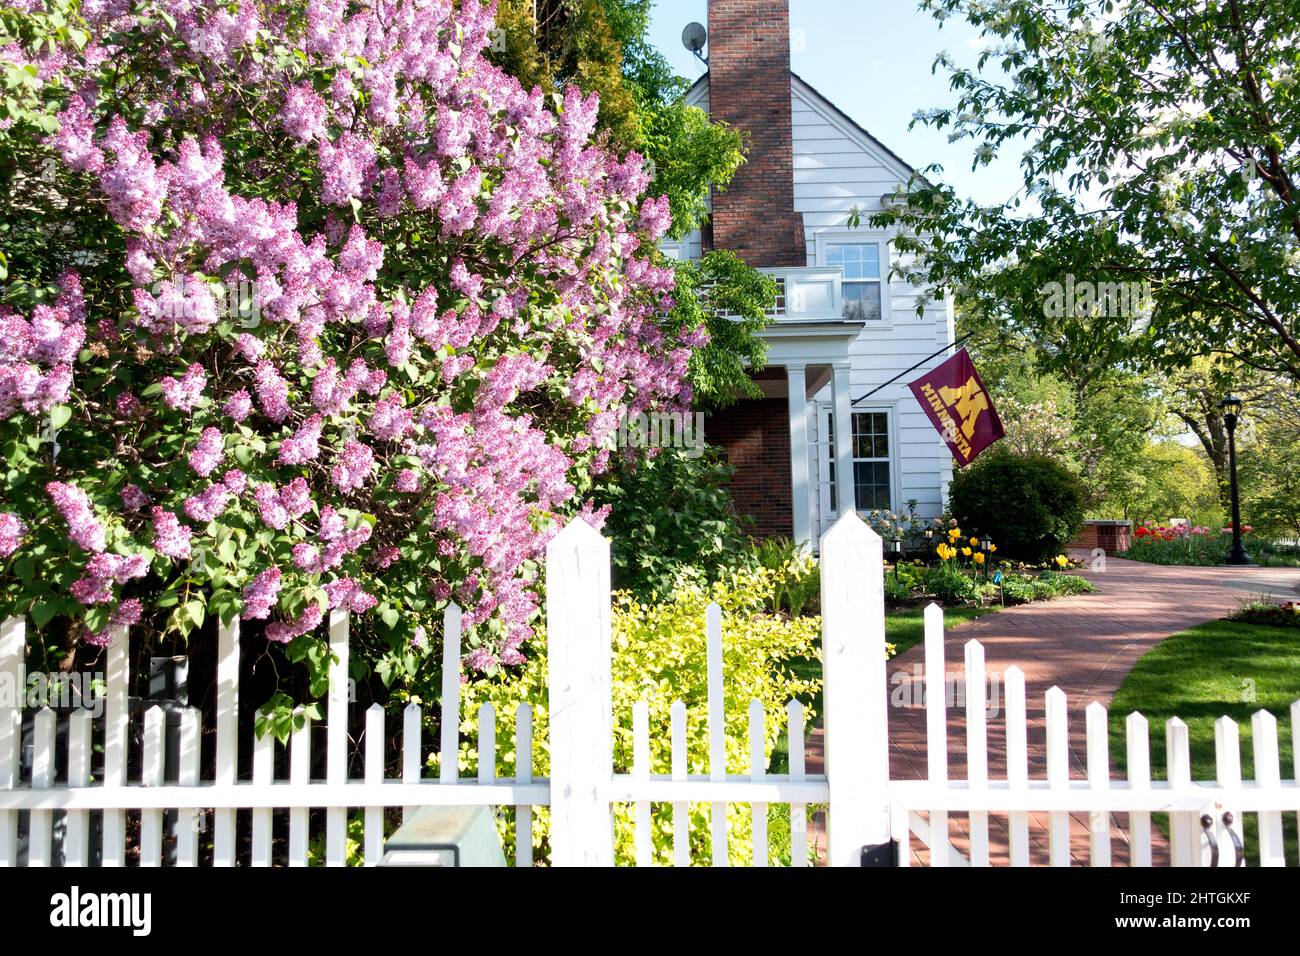 President of the University of Minnesota Eastcliff home with flag, white fence and blooming fruit tree. St Paul Minnesota MN USA Stock Photo